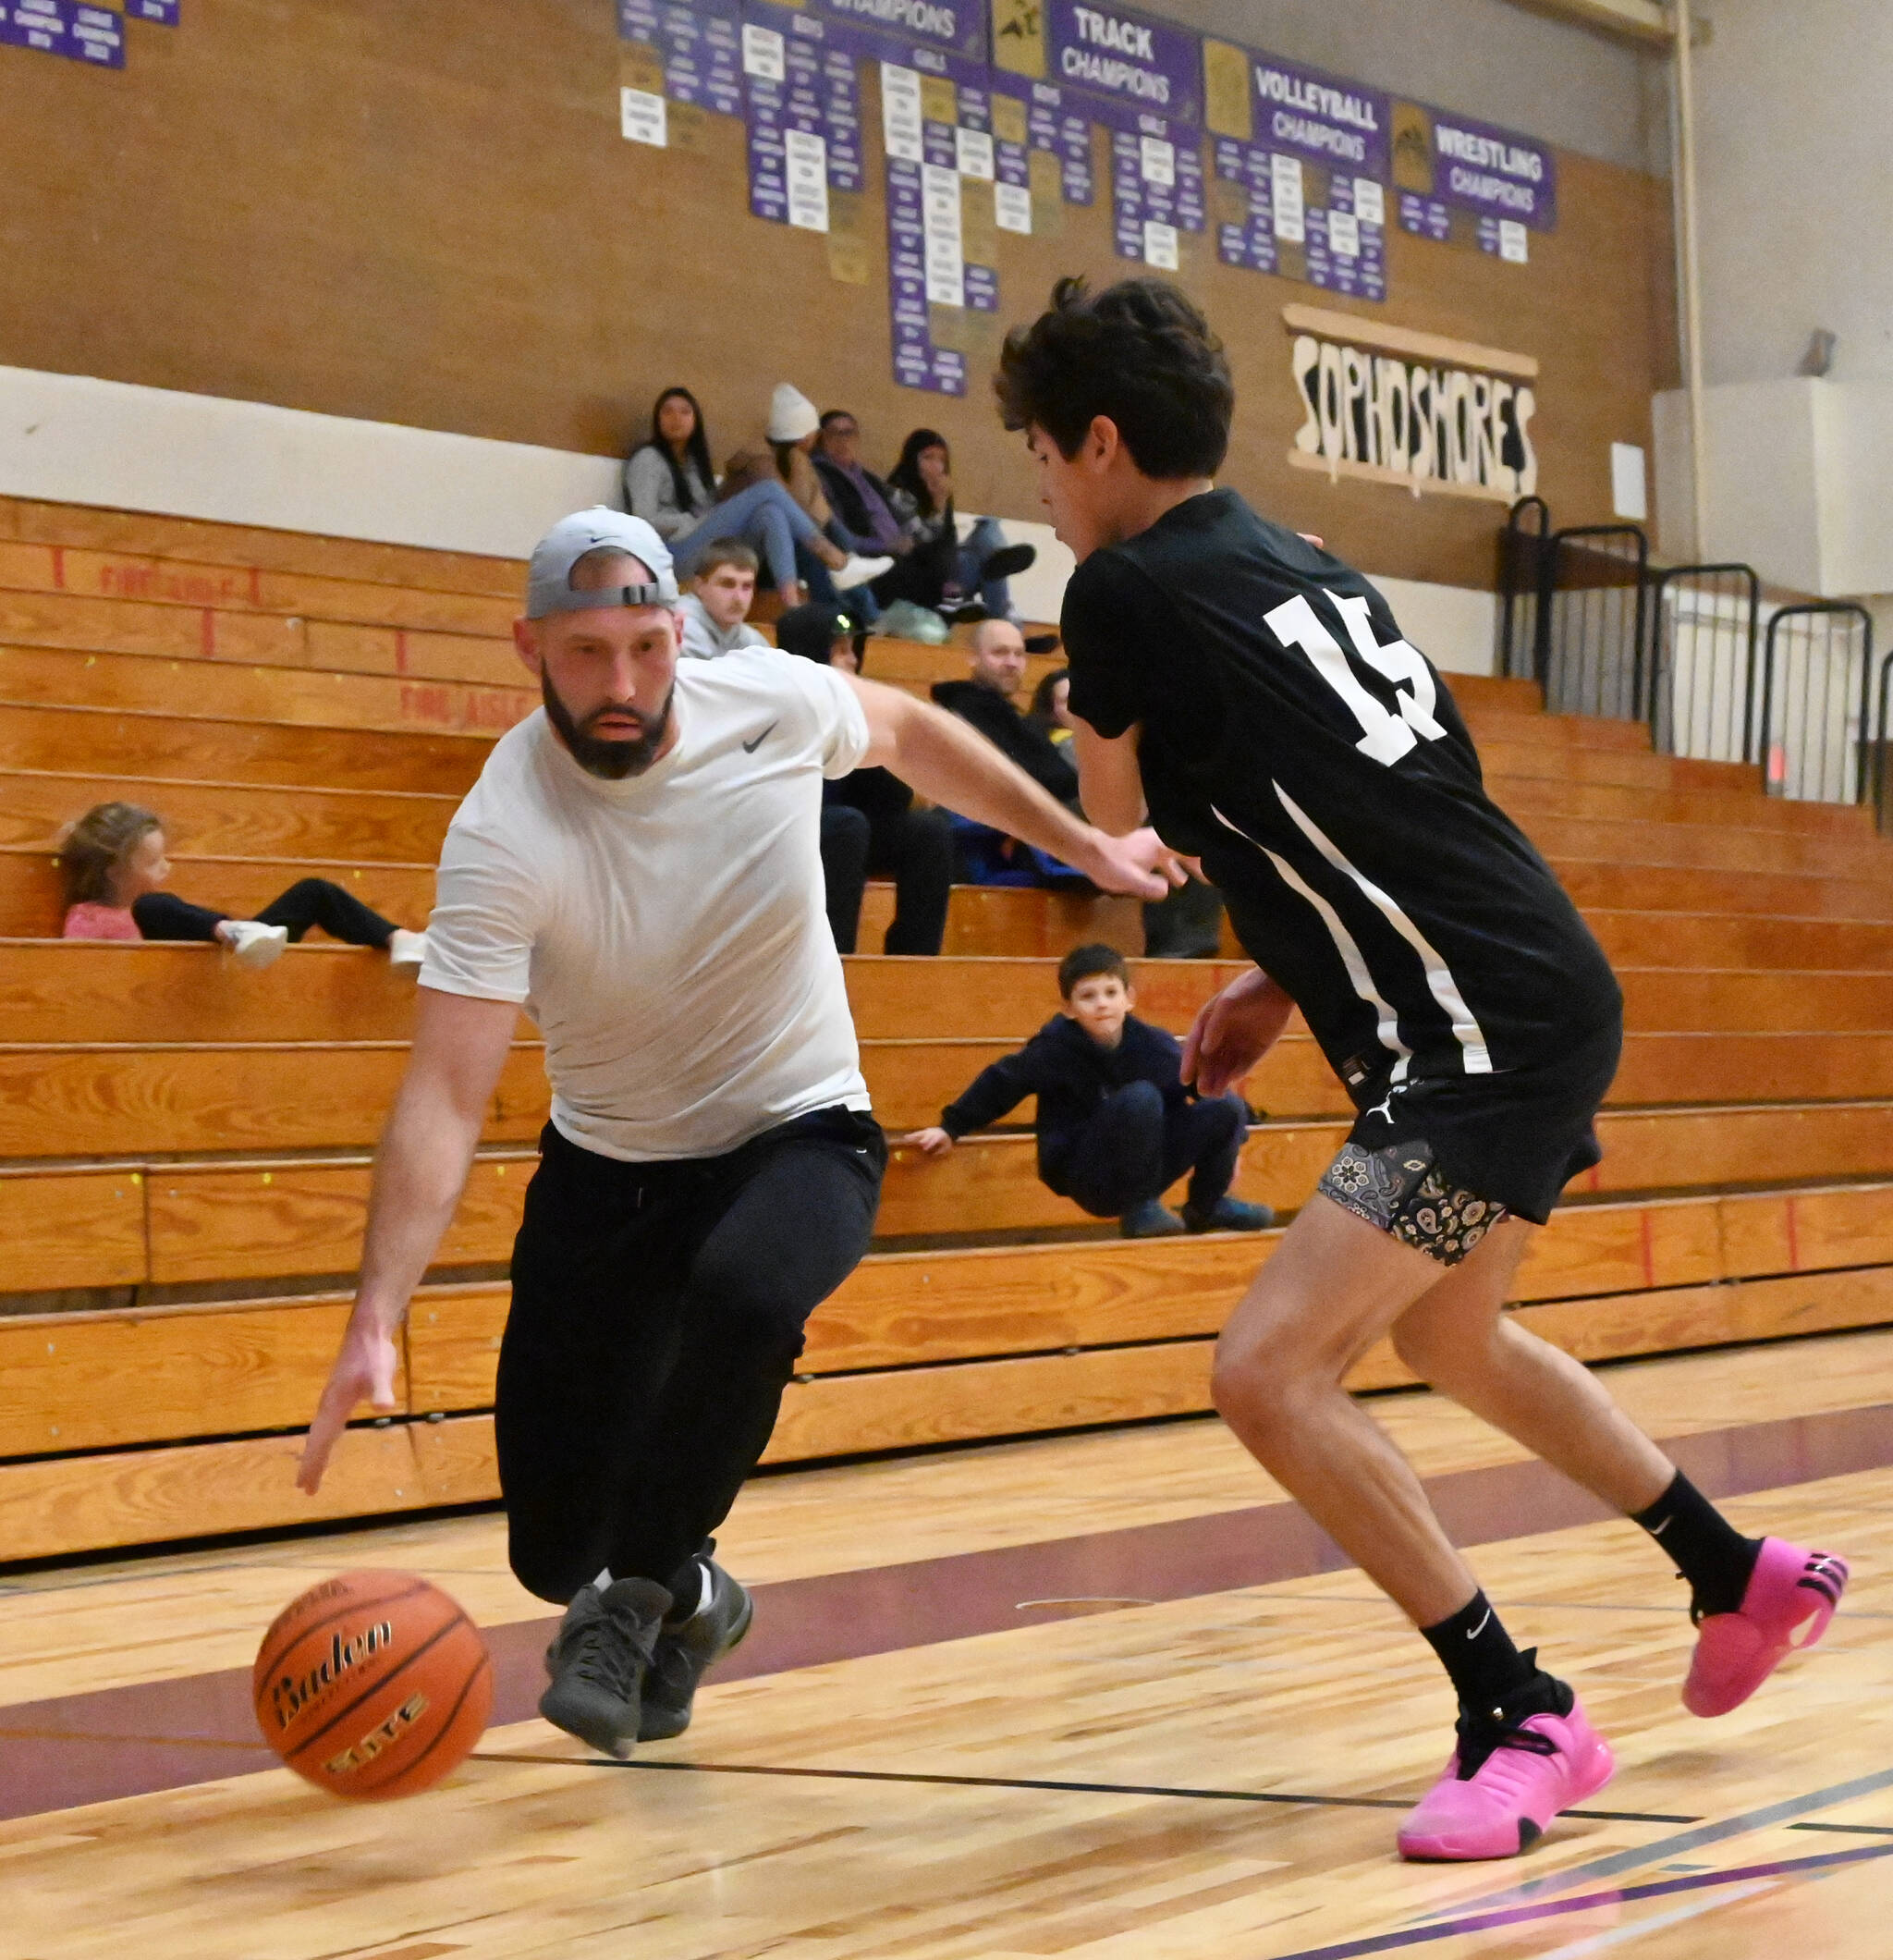 Ian Austin, left, looks to dribble past Vince Carrizosa in Sequim High School’s annual alumni game on Nov. 24.